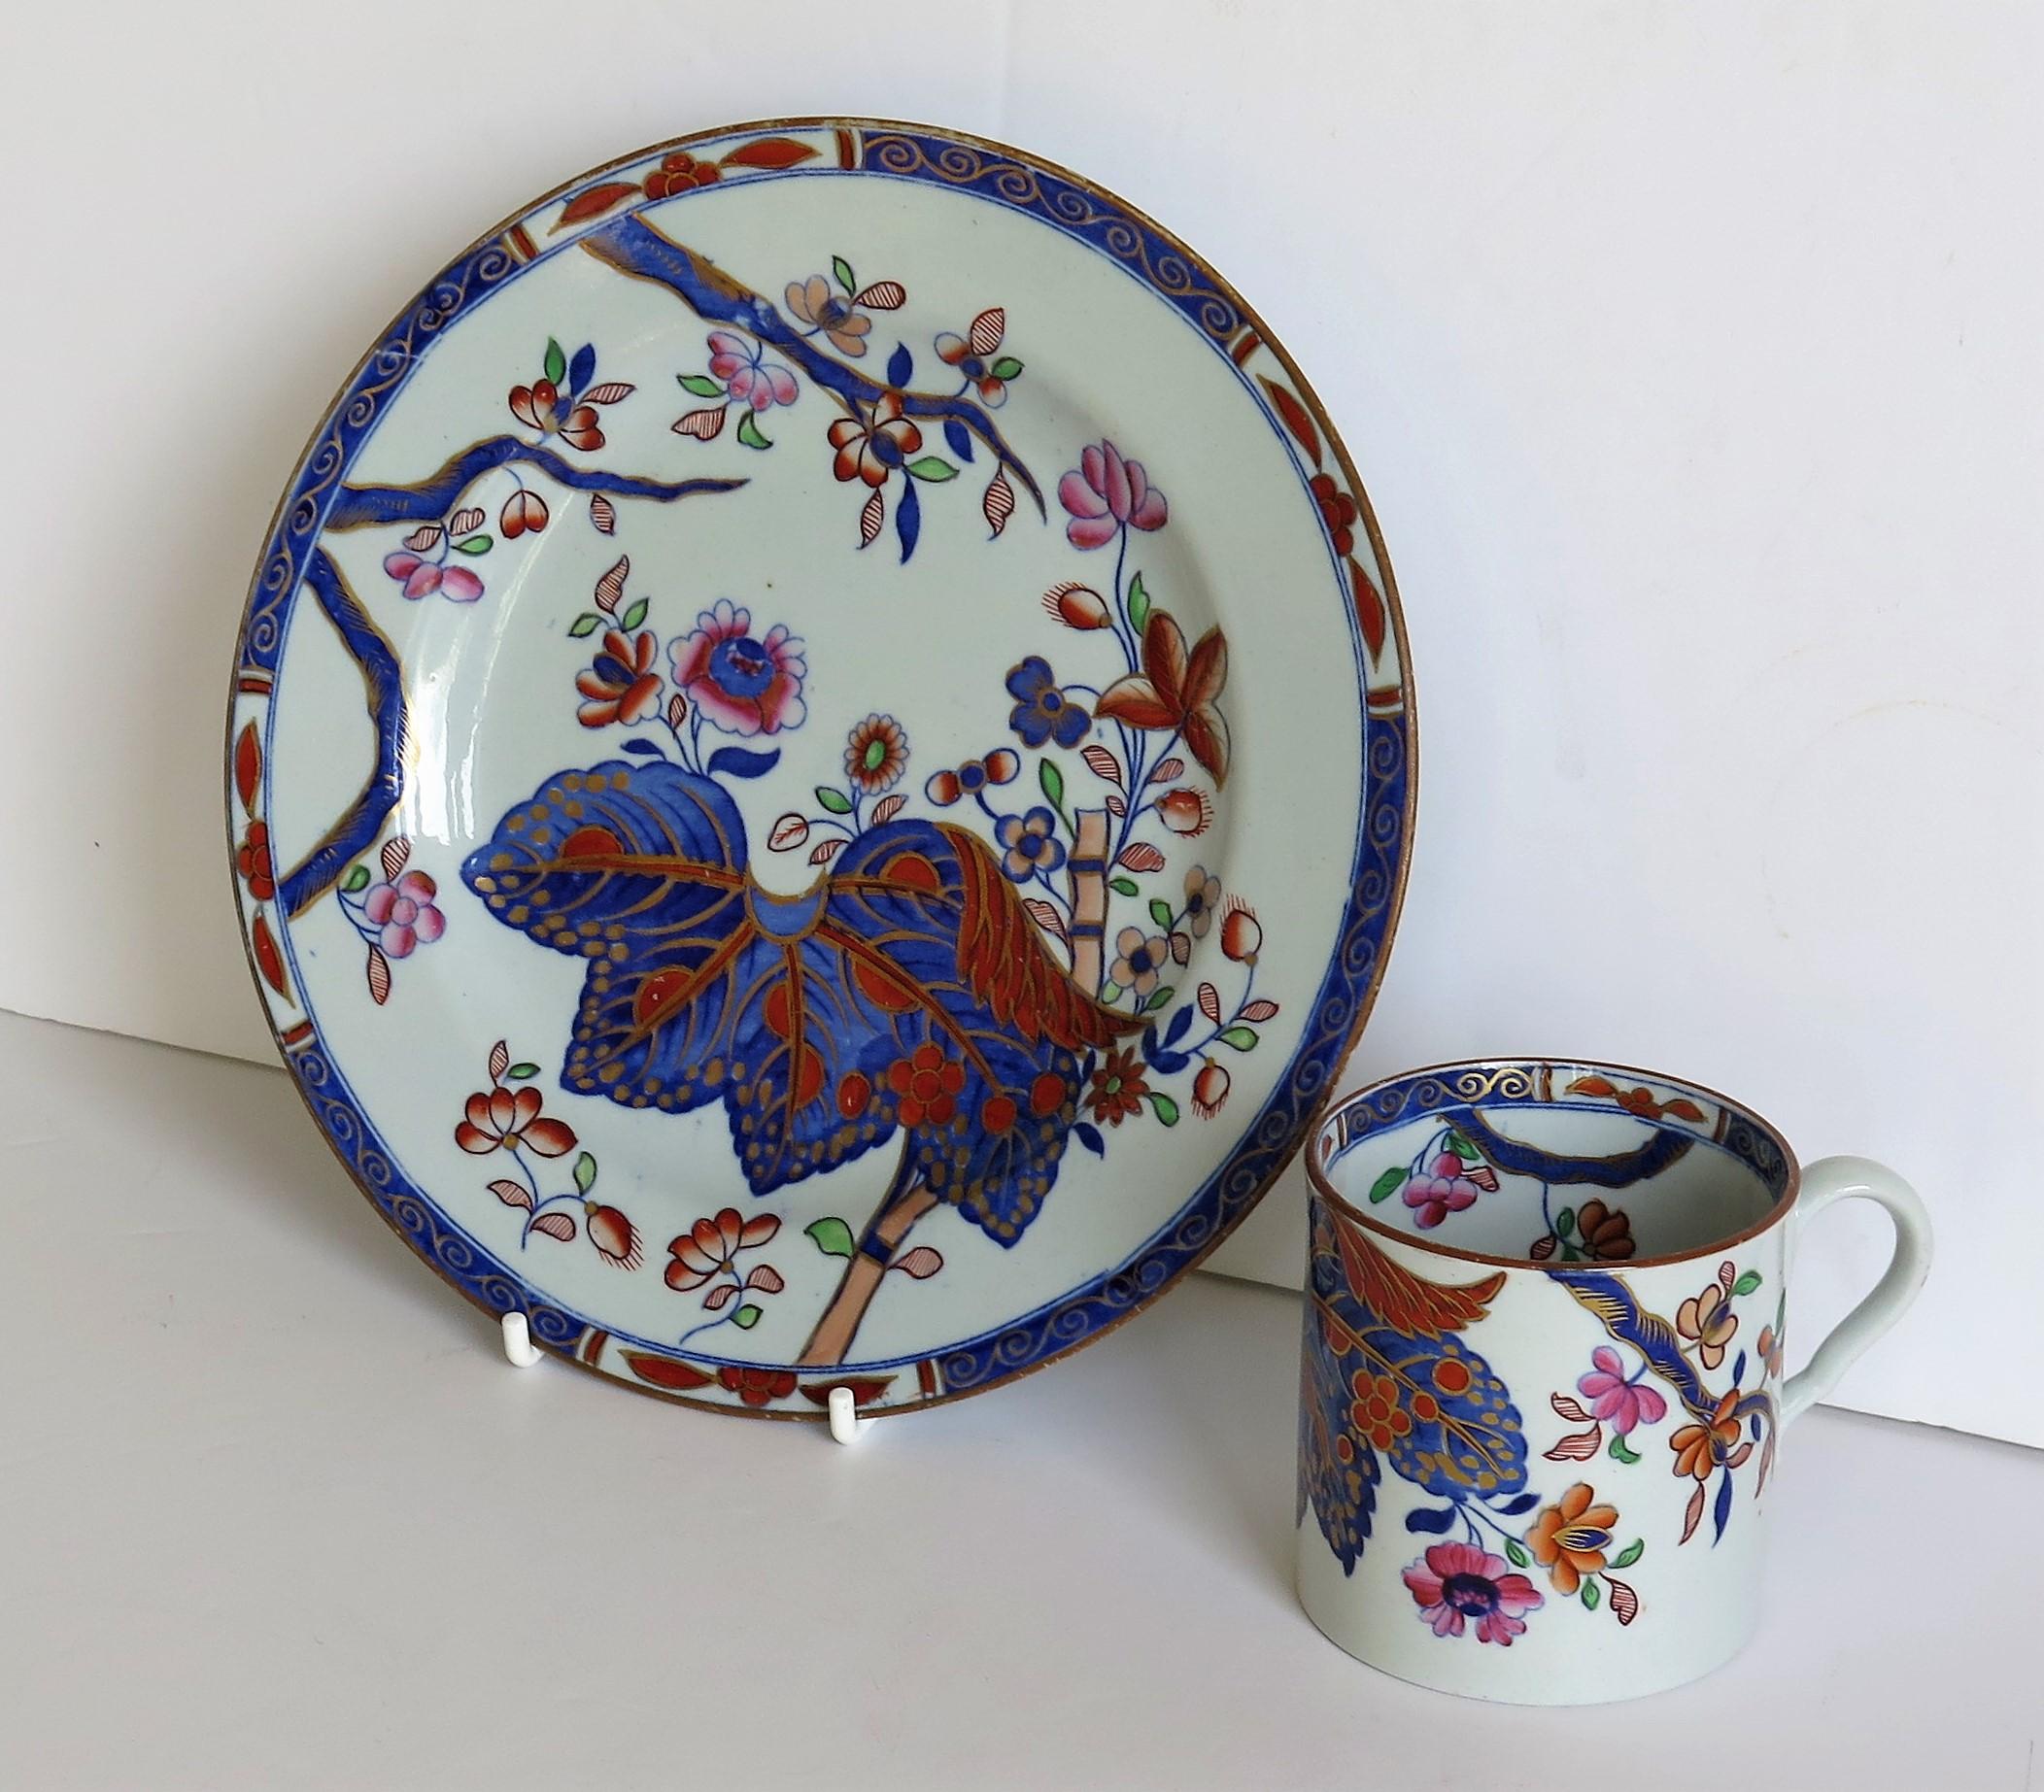 This is a very good stone China (Ironstone) coffee can and side plate, both hand painted in the tobacco leaf pattern, number 2061, made by the Spode factory in the early 19th century, English Georgian period, circa 1820.

Both pieces are made from